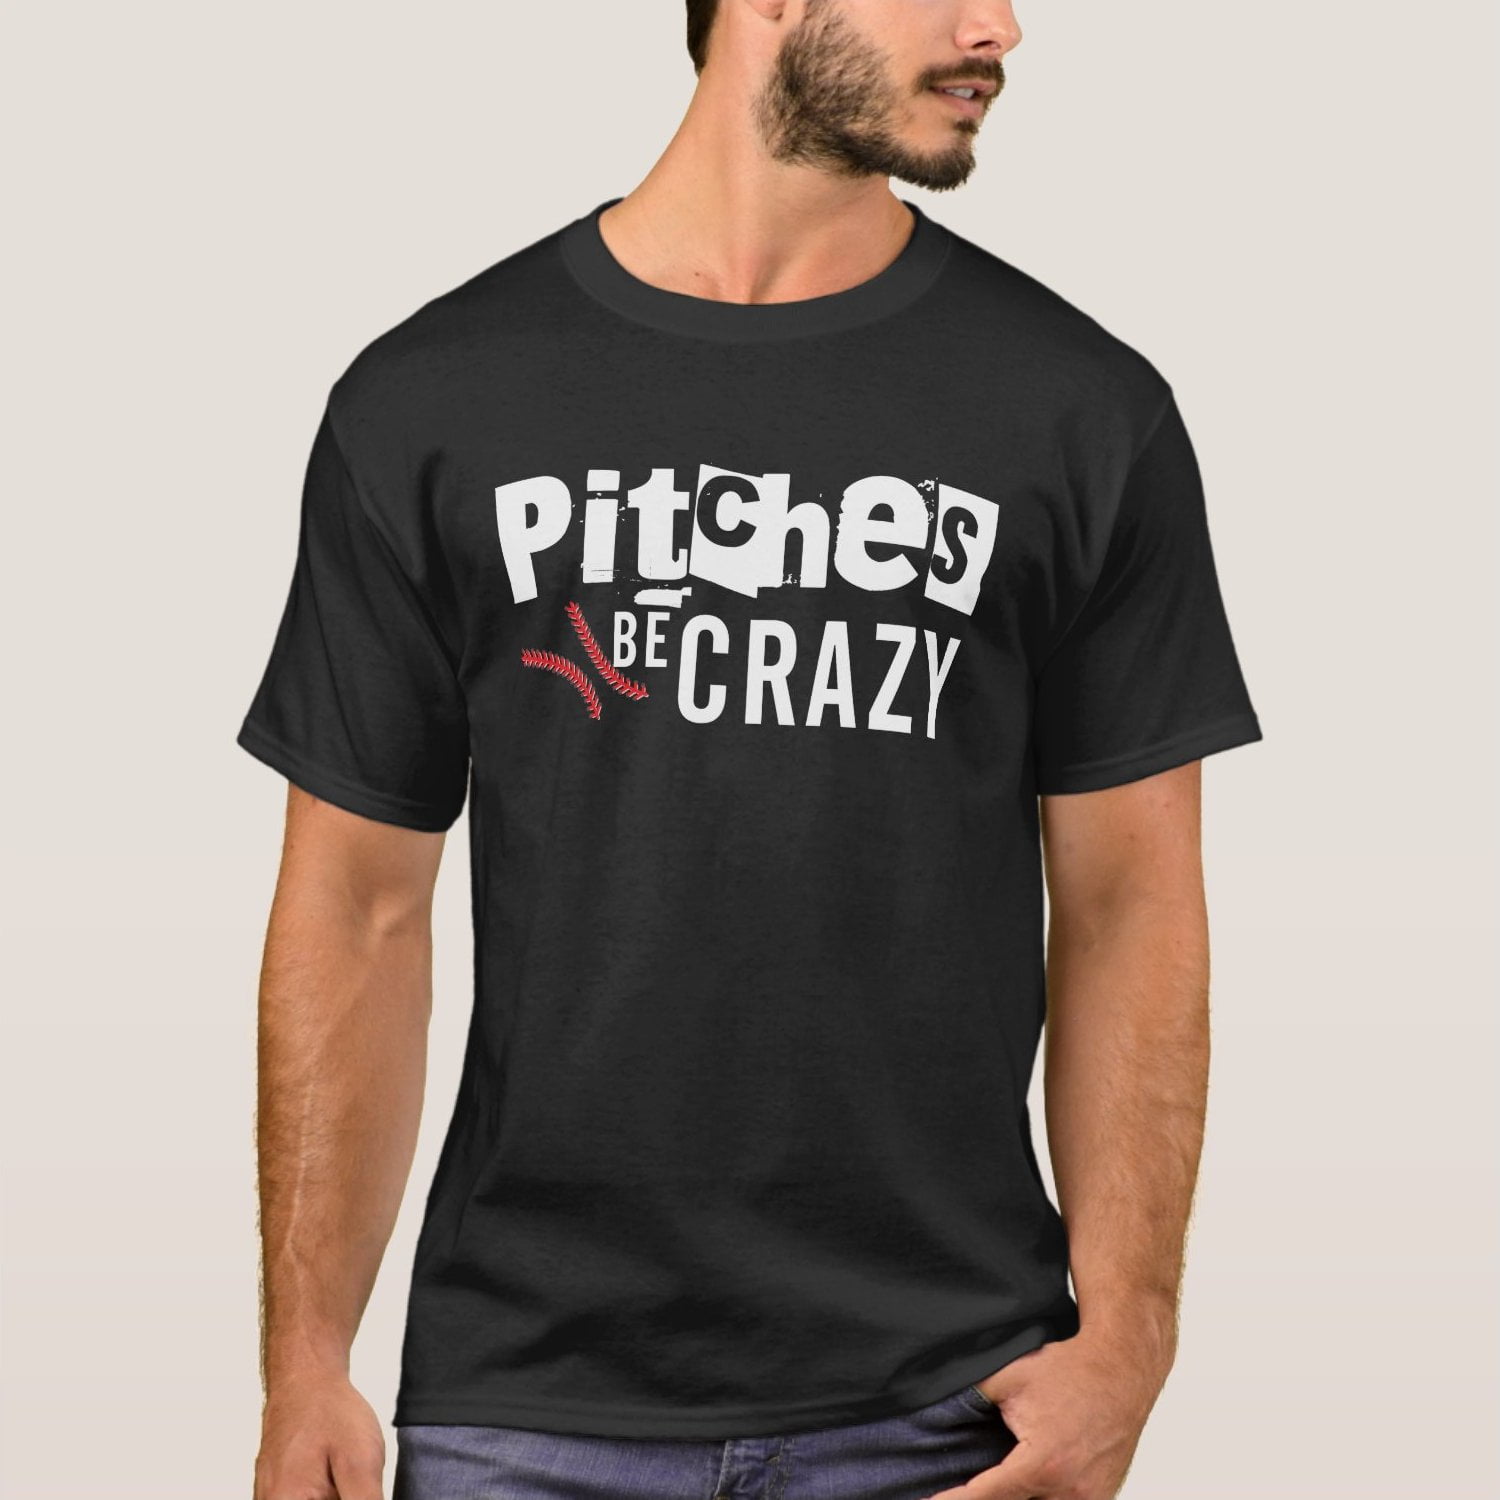 Pitches be crazy softball bleached tee